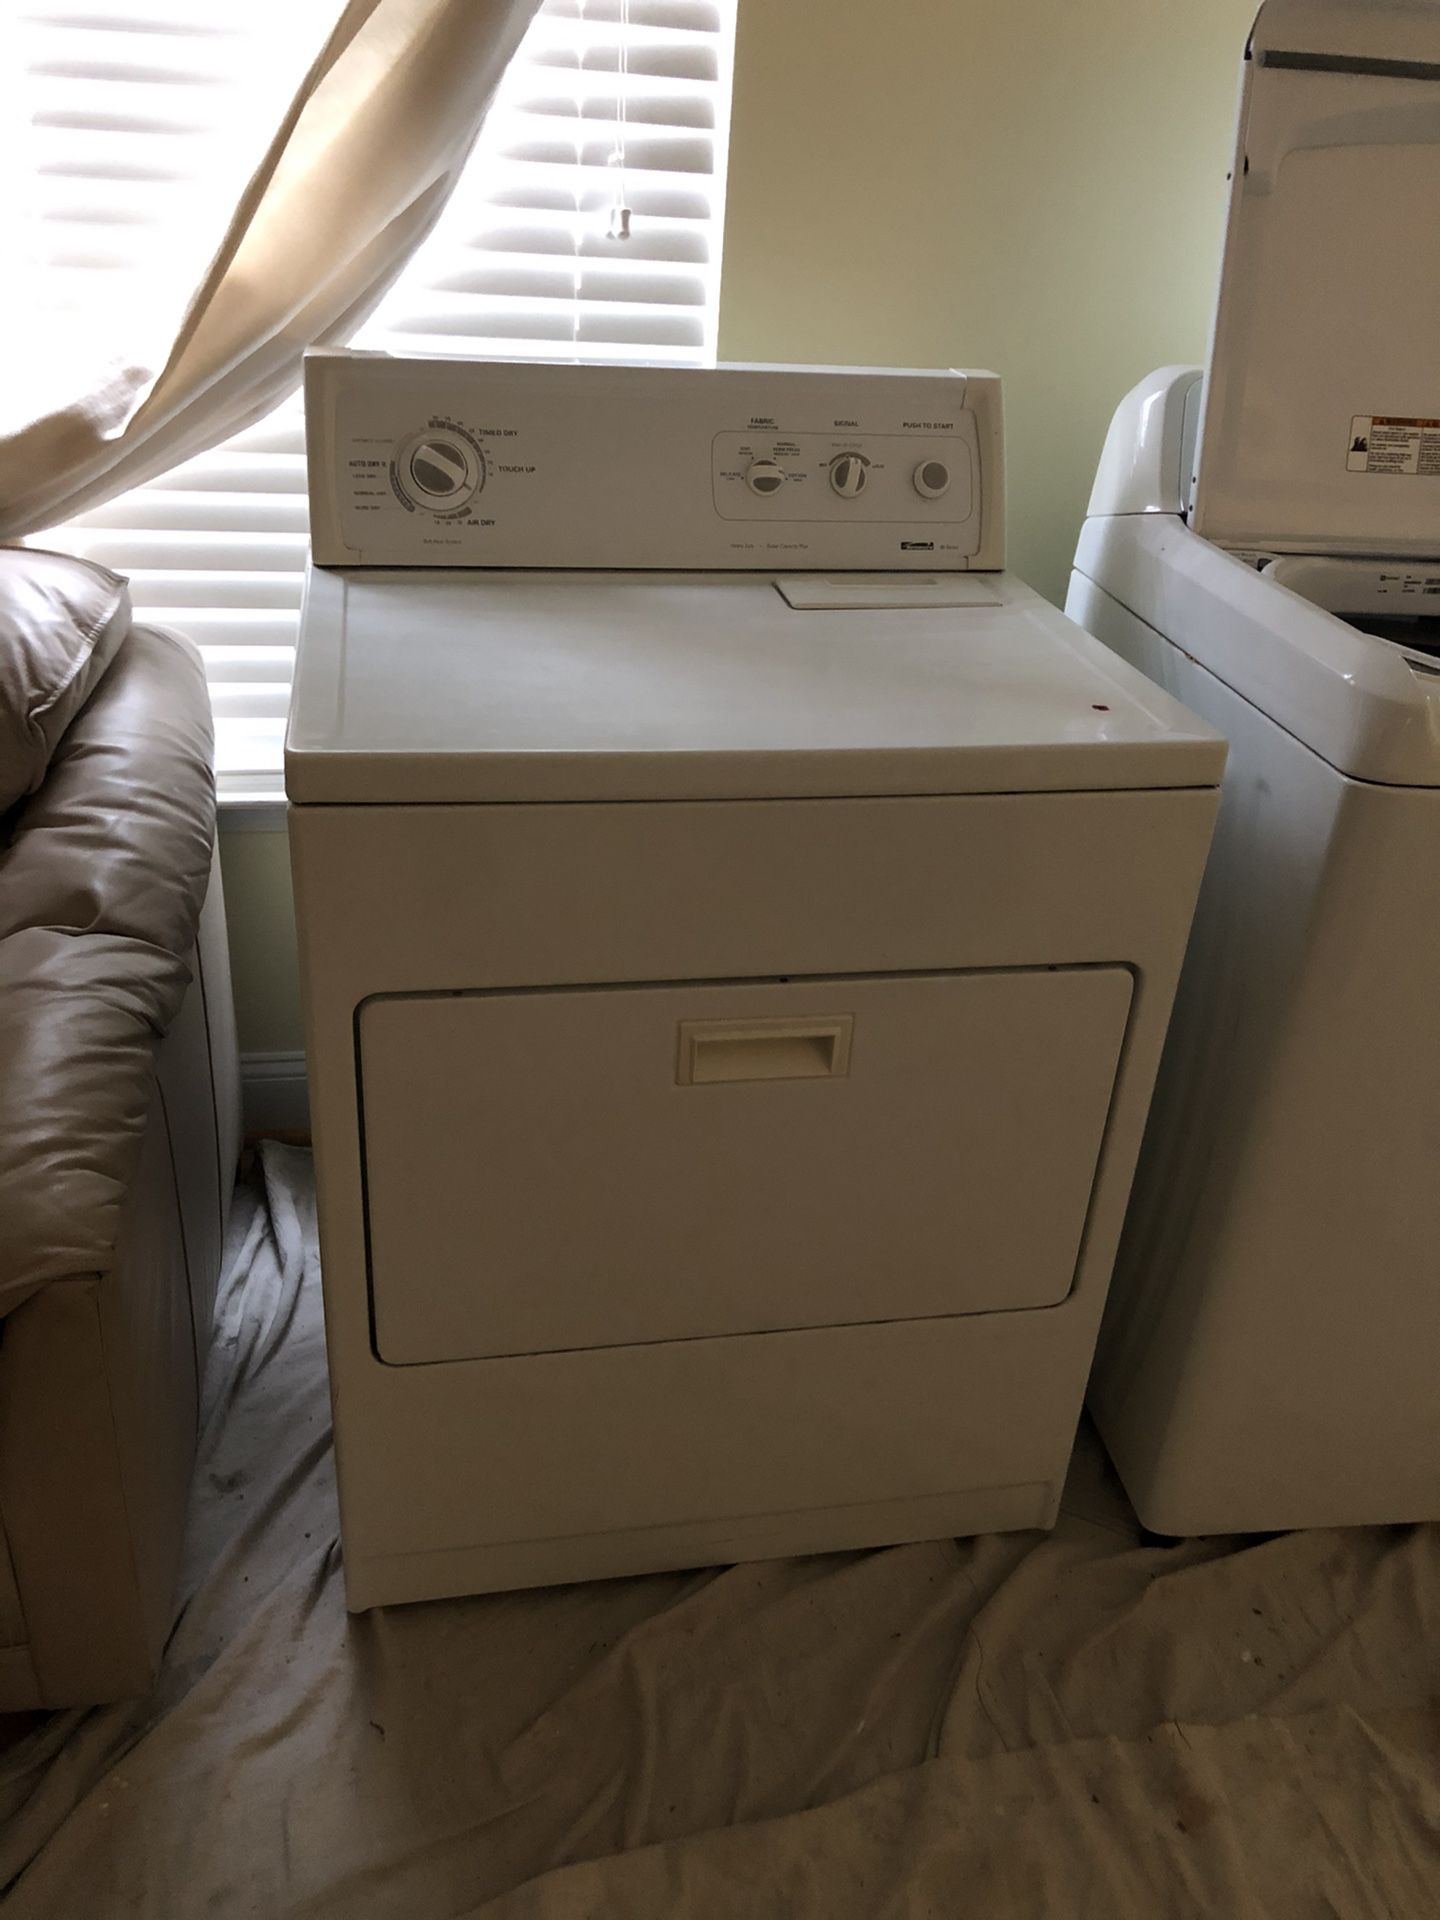 Kenmore Dryer for sale!